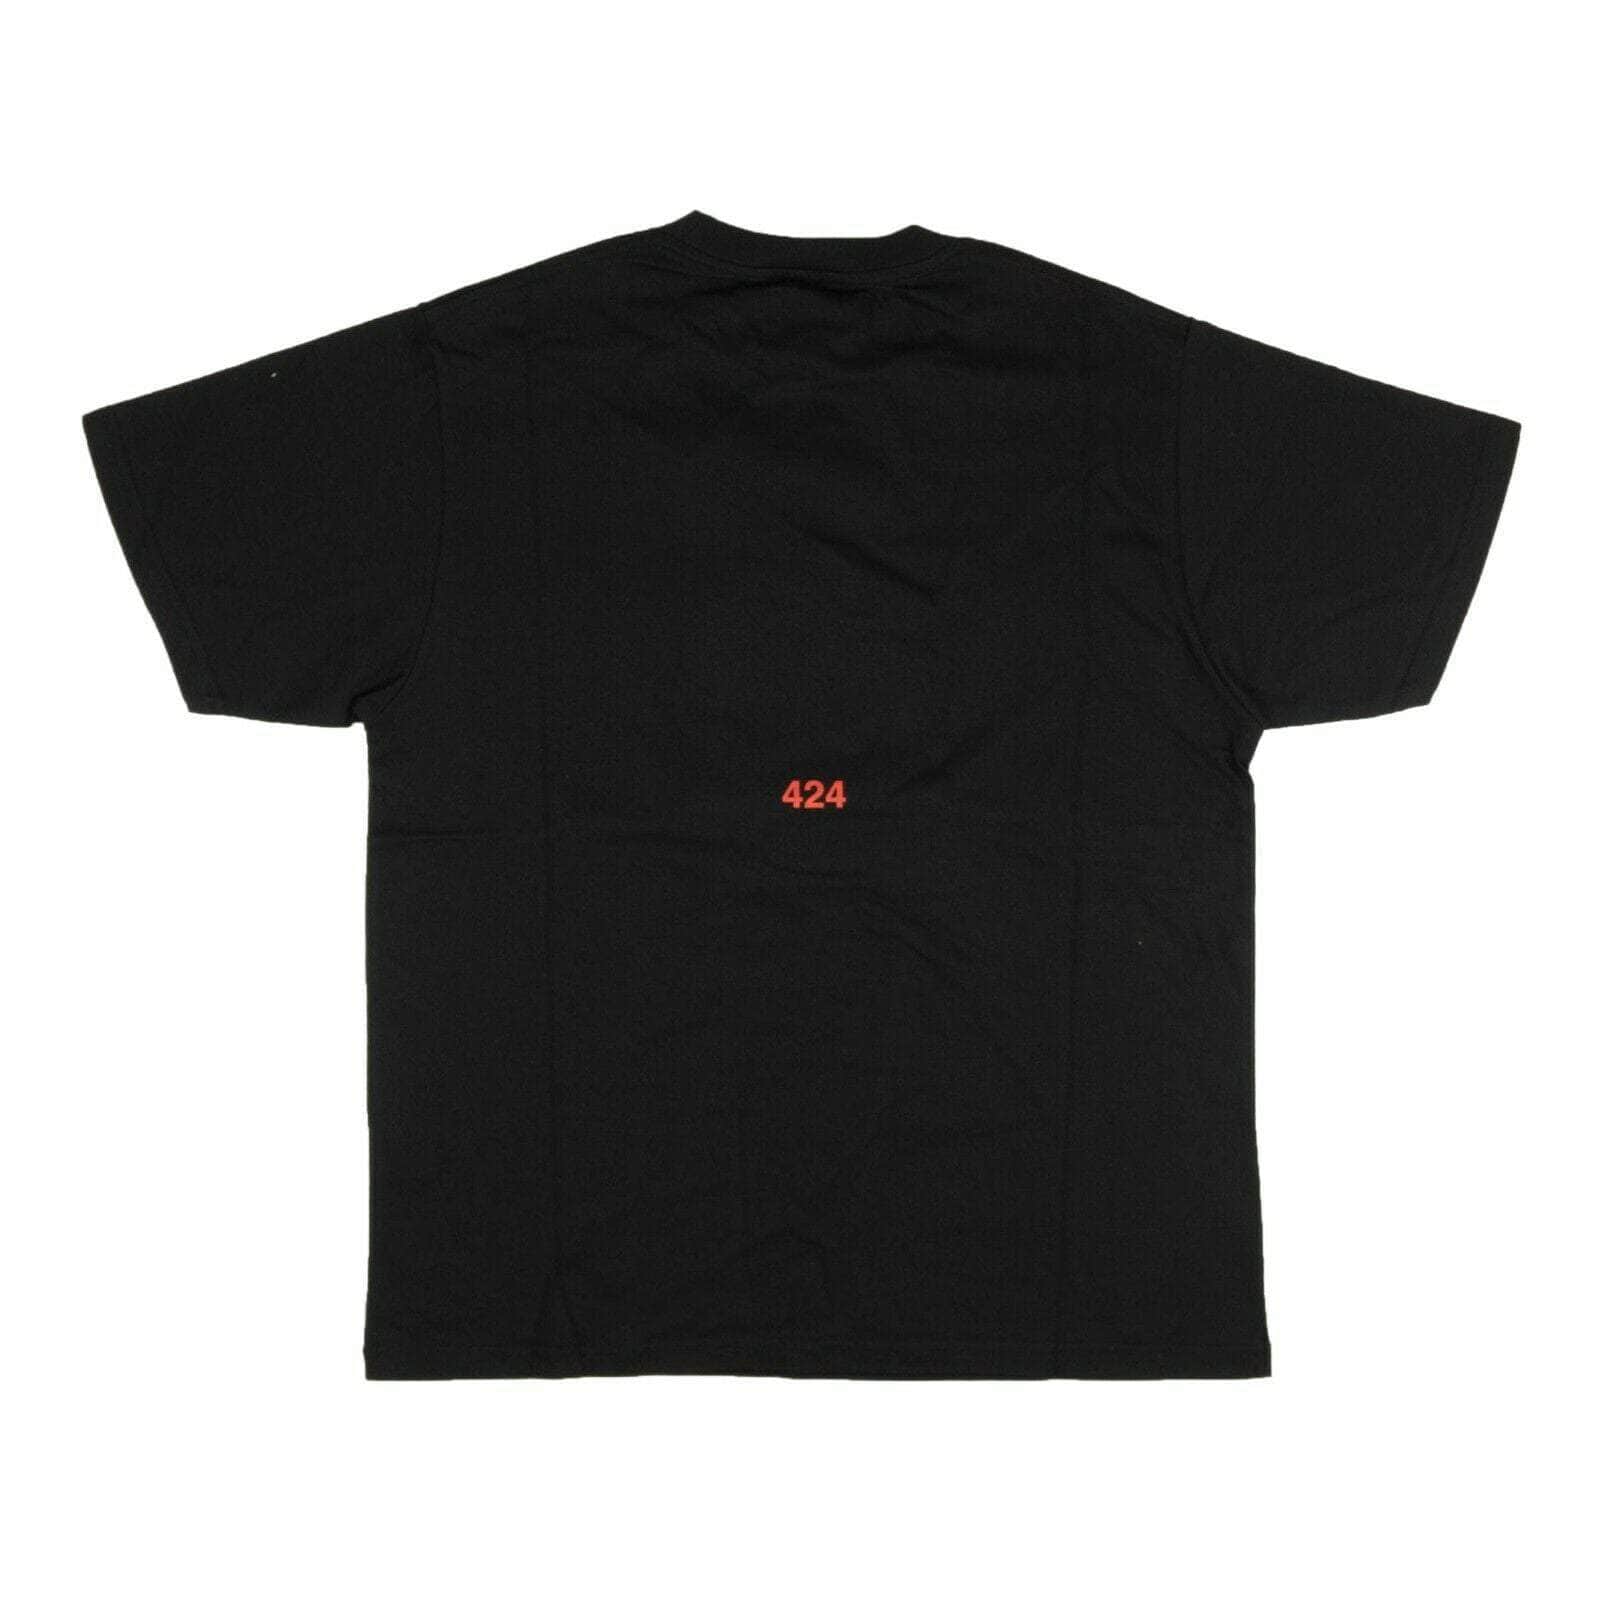 424 ON FAIRFAX 424-on-fairfax, channelenable-all, chicmi, couponcollection, gender-mens, main-clothing, mens-shoes, size-l, size-m, size-s, size-xl, size-xxl, under-250 S Black Short Sleeve New-Love T-Shirt 95-424-1134/S 95-424-1134/S